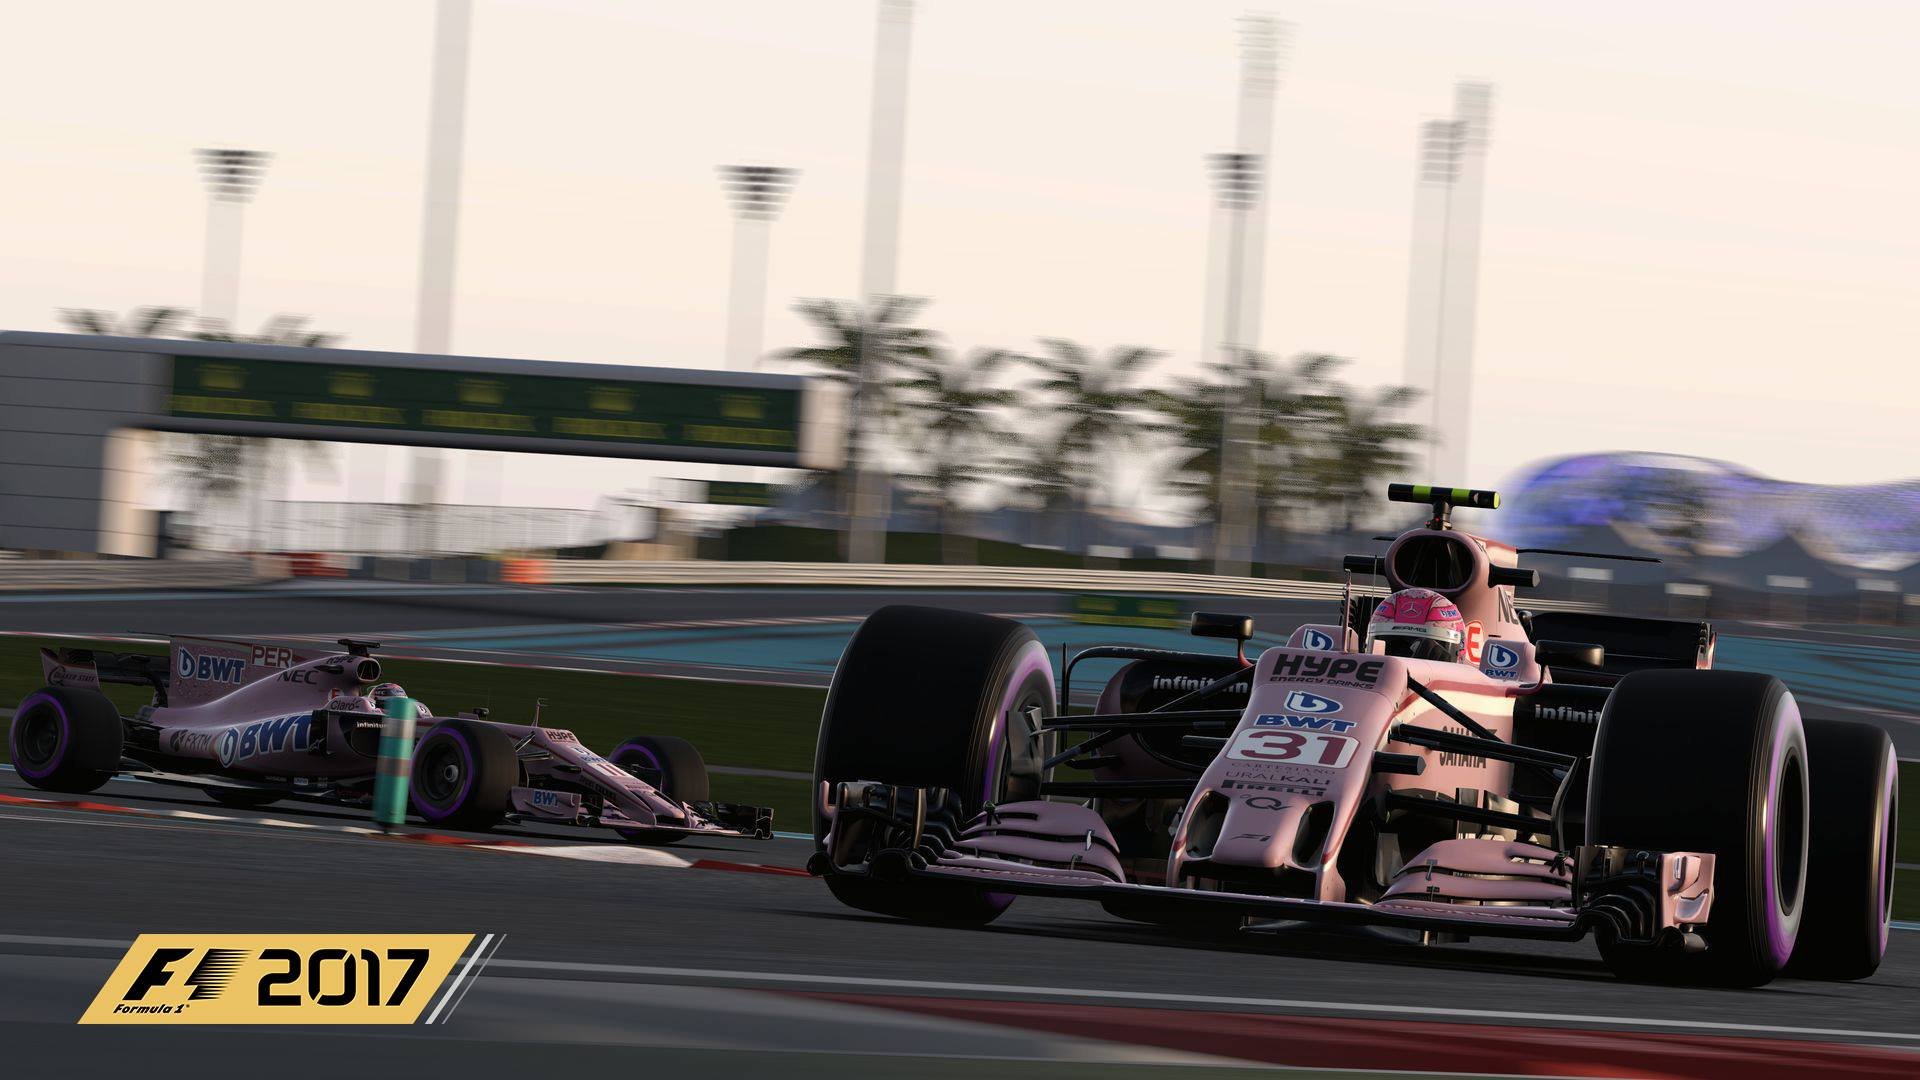 More information about "F1 2017: nuova patch v1.11 disponibile"